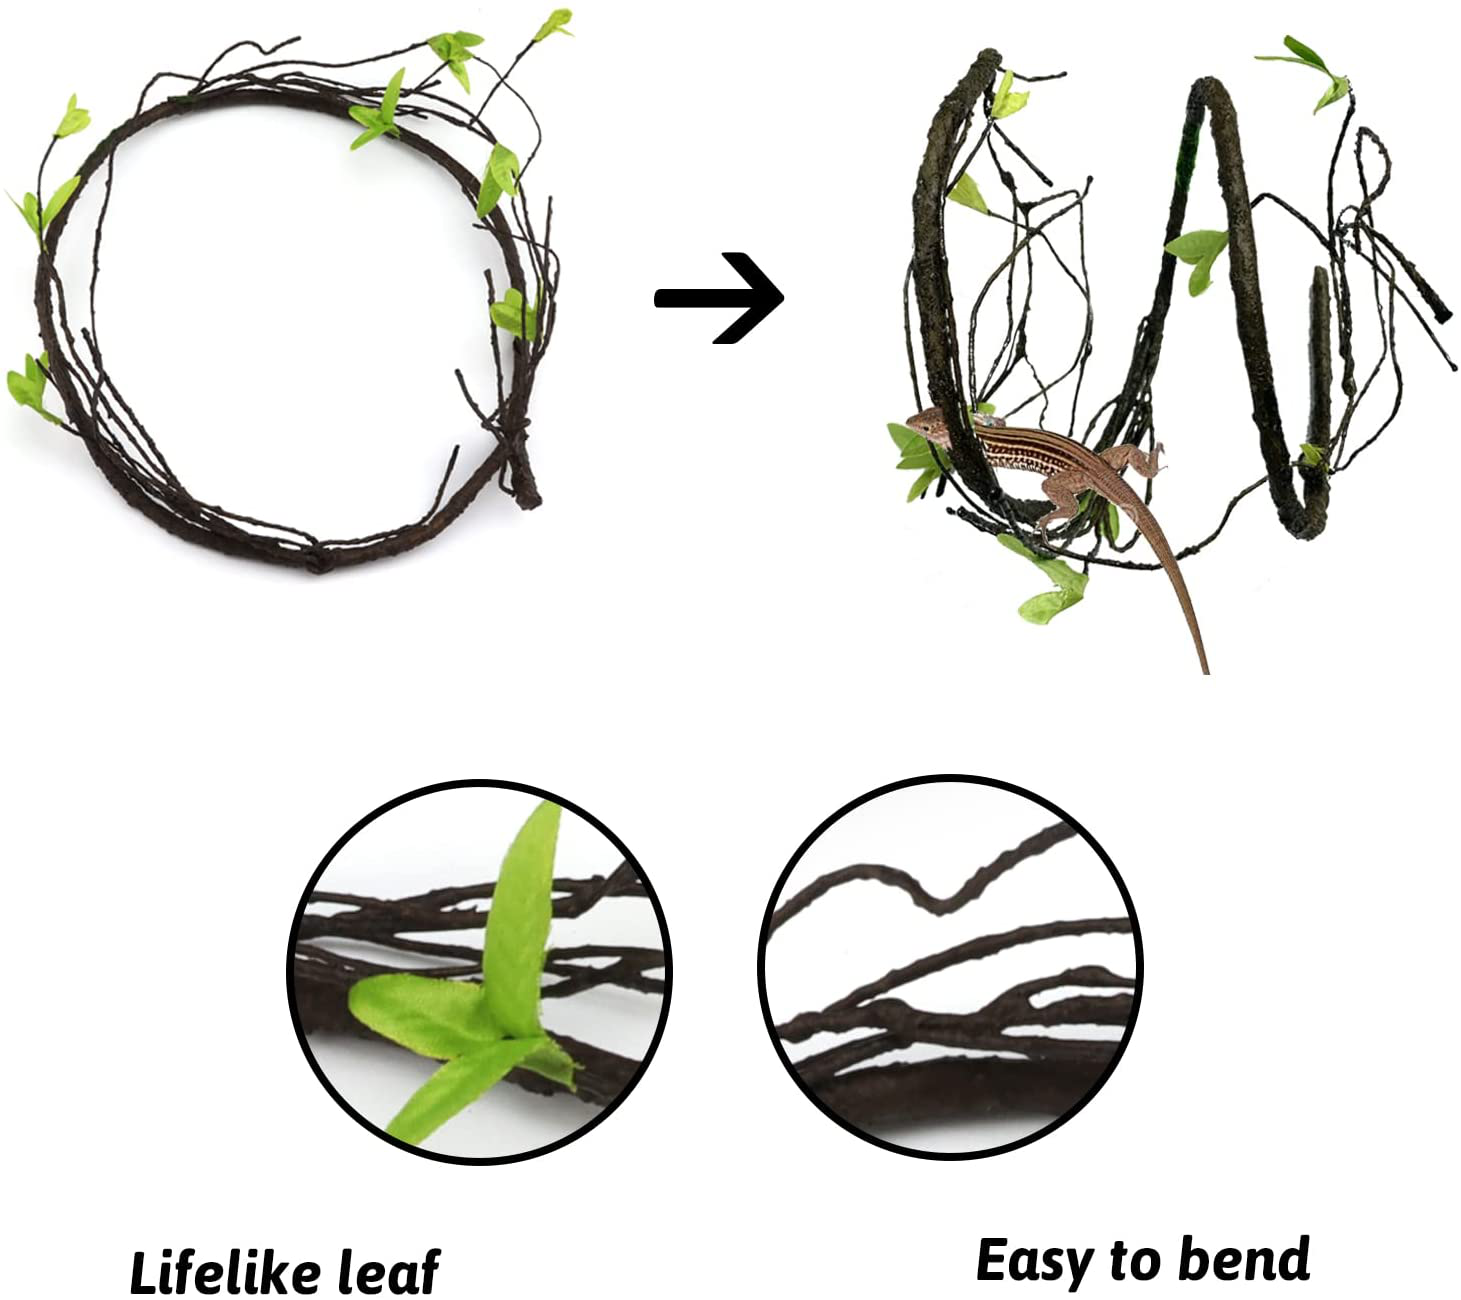 Pietypet Reptile Lizard Habitat Decor Accessories, Bearded Dragon Hammock, Reptile Hammock with Artificial Climbing Vines and Plants for Chameleon, Lizards, Gecko, Snakes, Lguana Animals & Pet Supplies > Pet Supplies > Reptile & Amphibian Supplies > Reptile & Amphibian Habitat Accessories PietyPet   